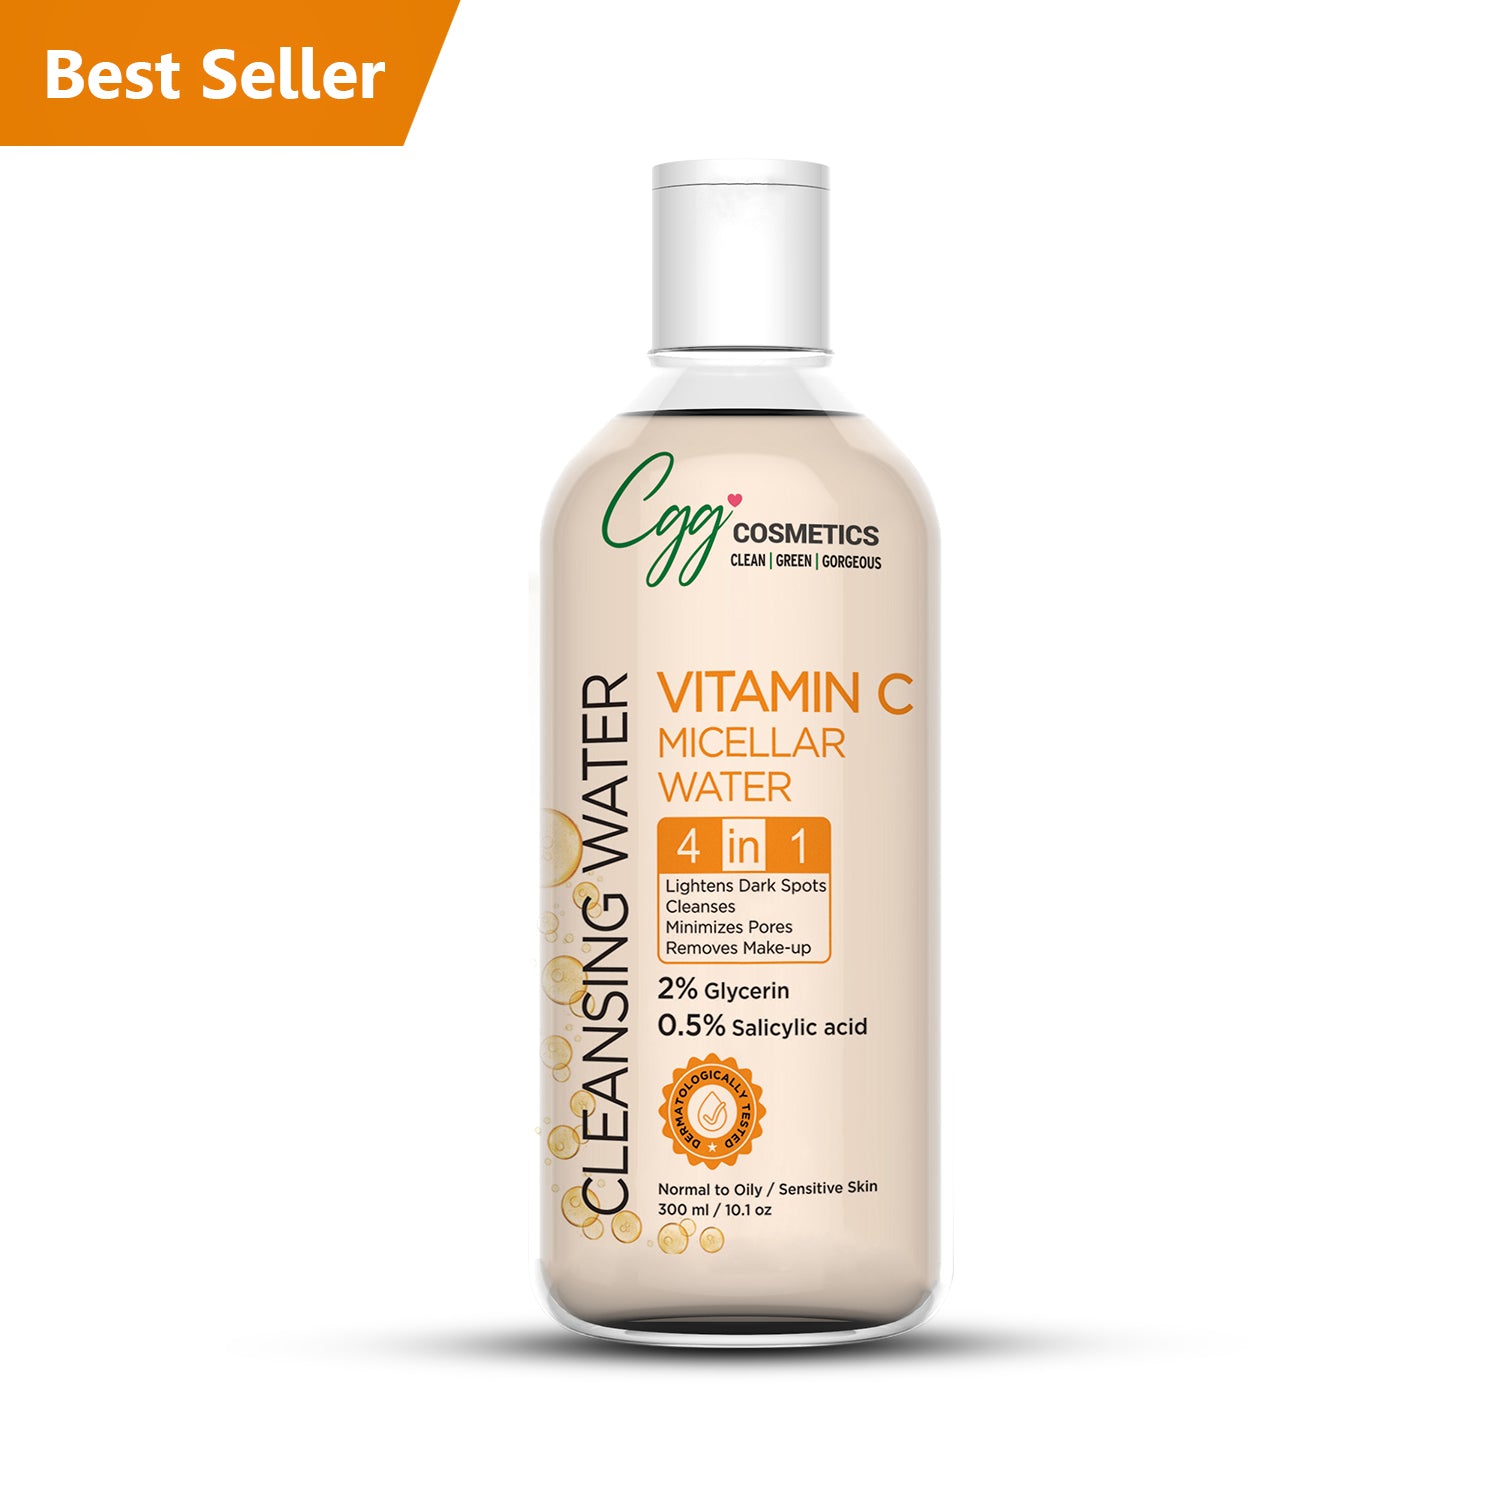 CGG Cosmetics Vitamin C Micellar Cleansing Water | 4 in 1 Lightens Dark Spots, Cleanses, Minimizes Pores & Removes Makeup - 300ml